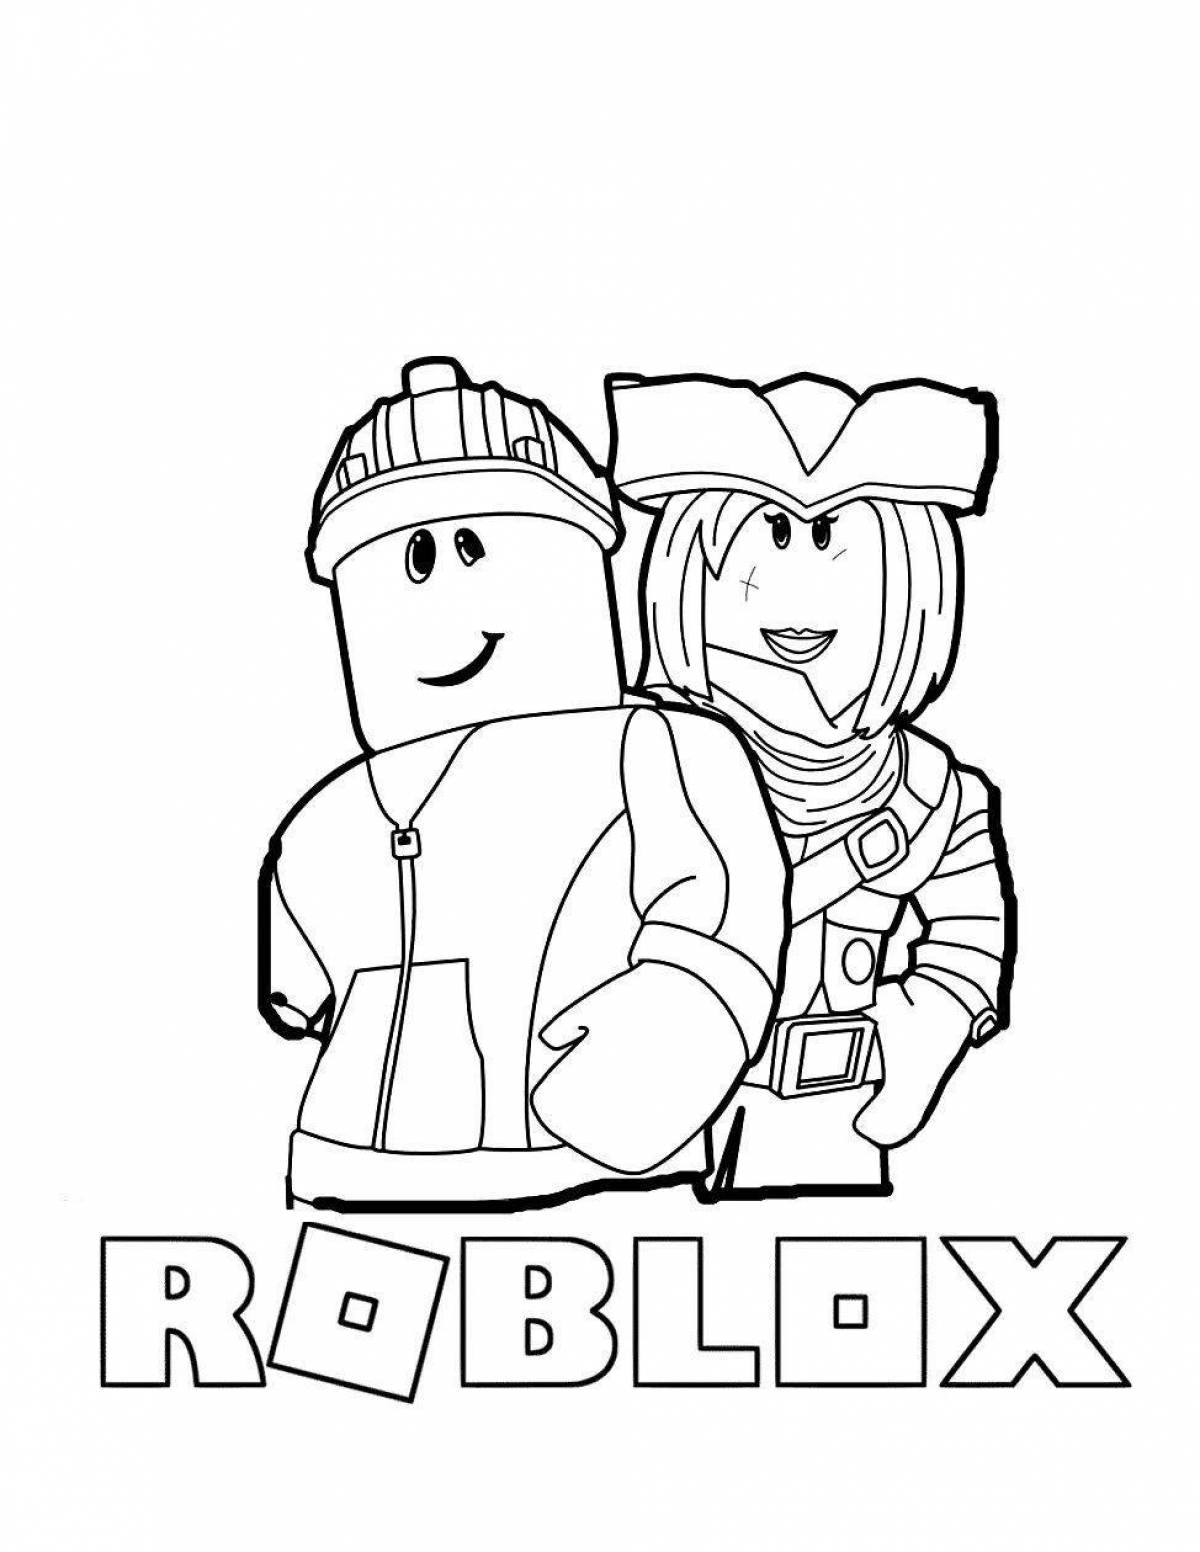 Adorable roblox skins for girls for donation